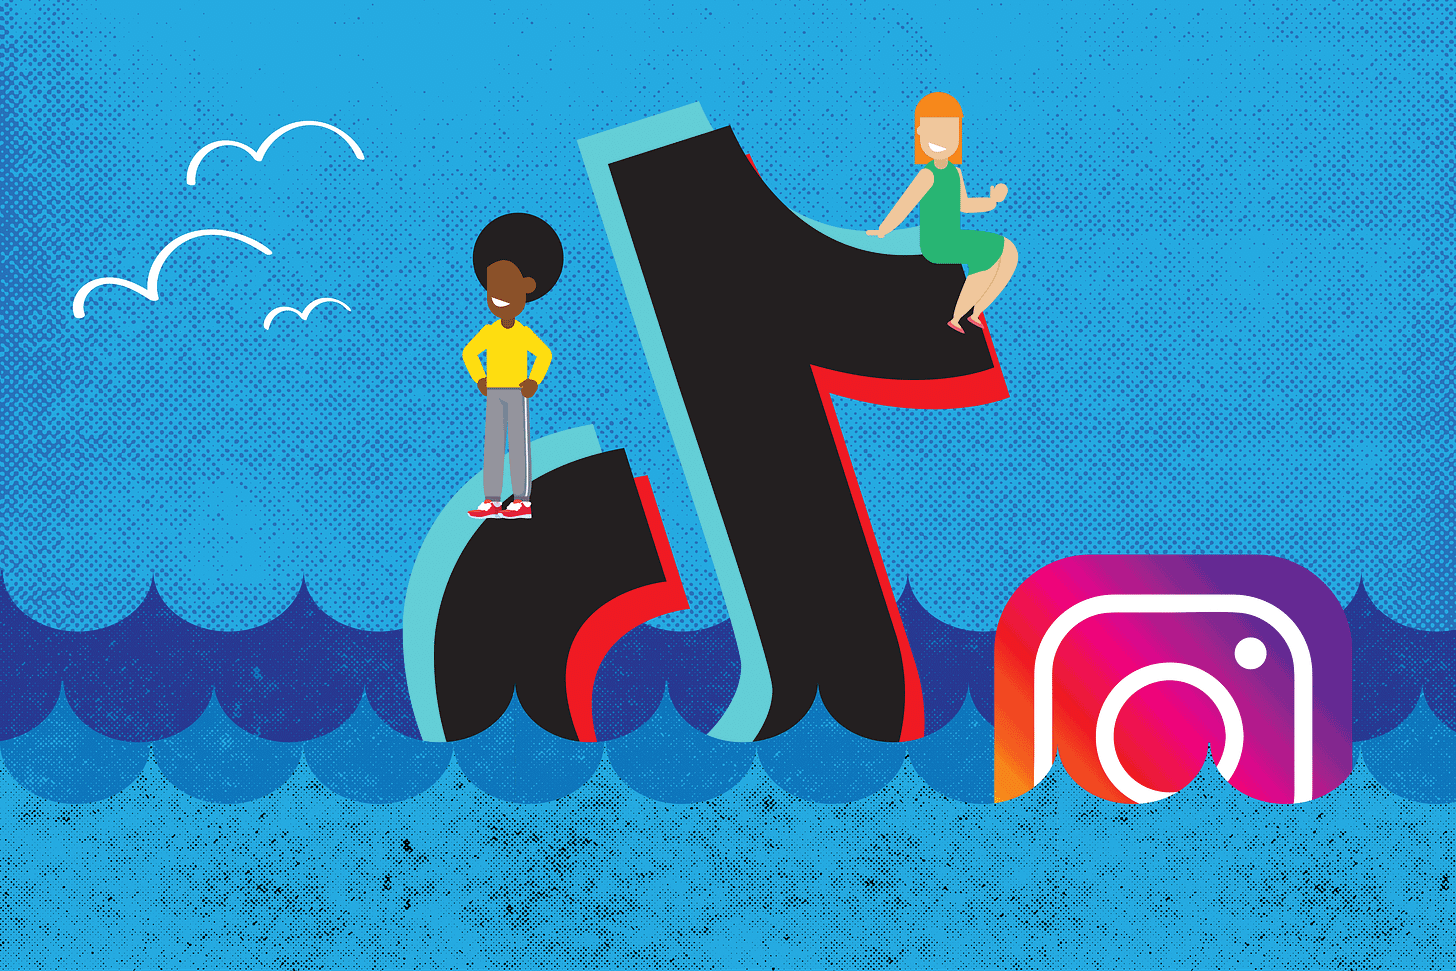 Amid fears of TikTok&#39;s demise, influencers are fleeing the app